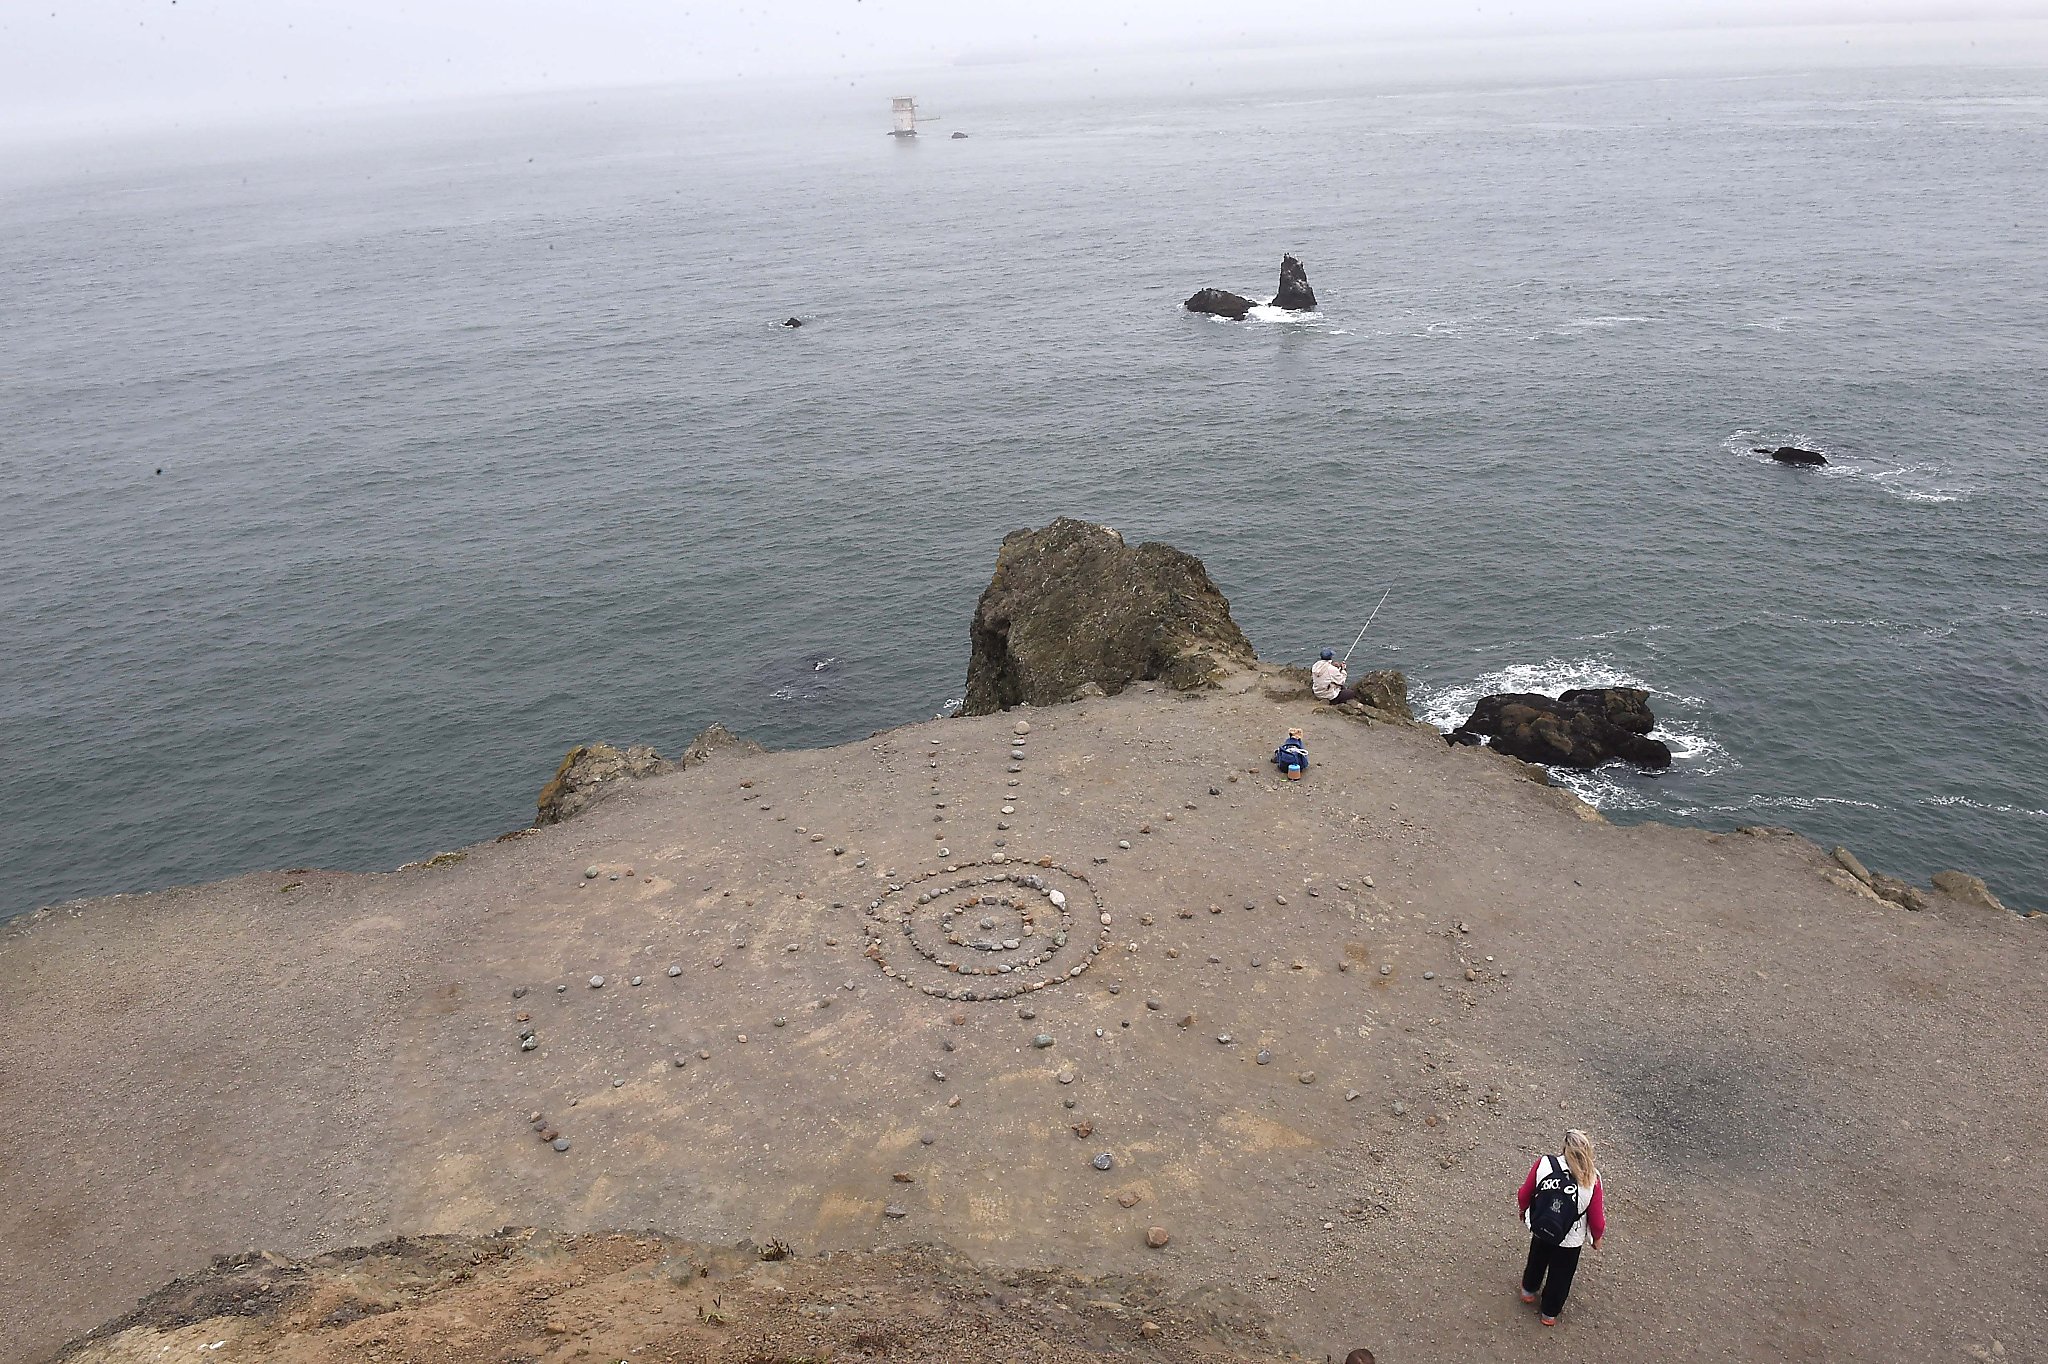 Lands End labyrinth keeper finds the way to a gratifying role